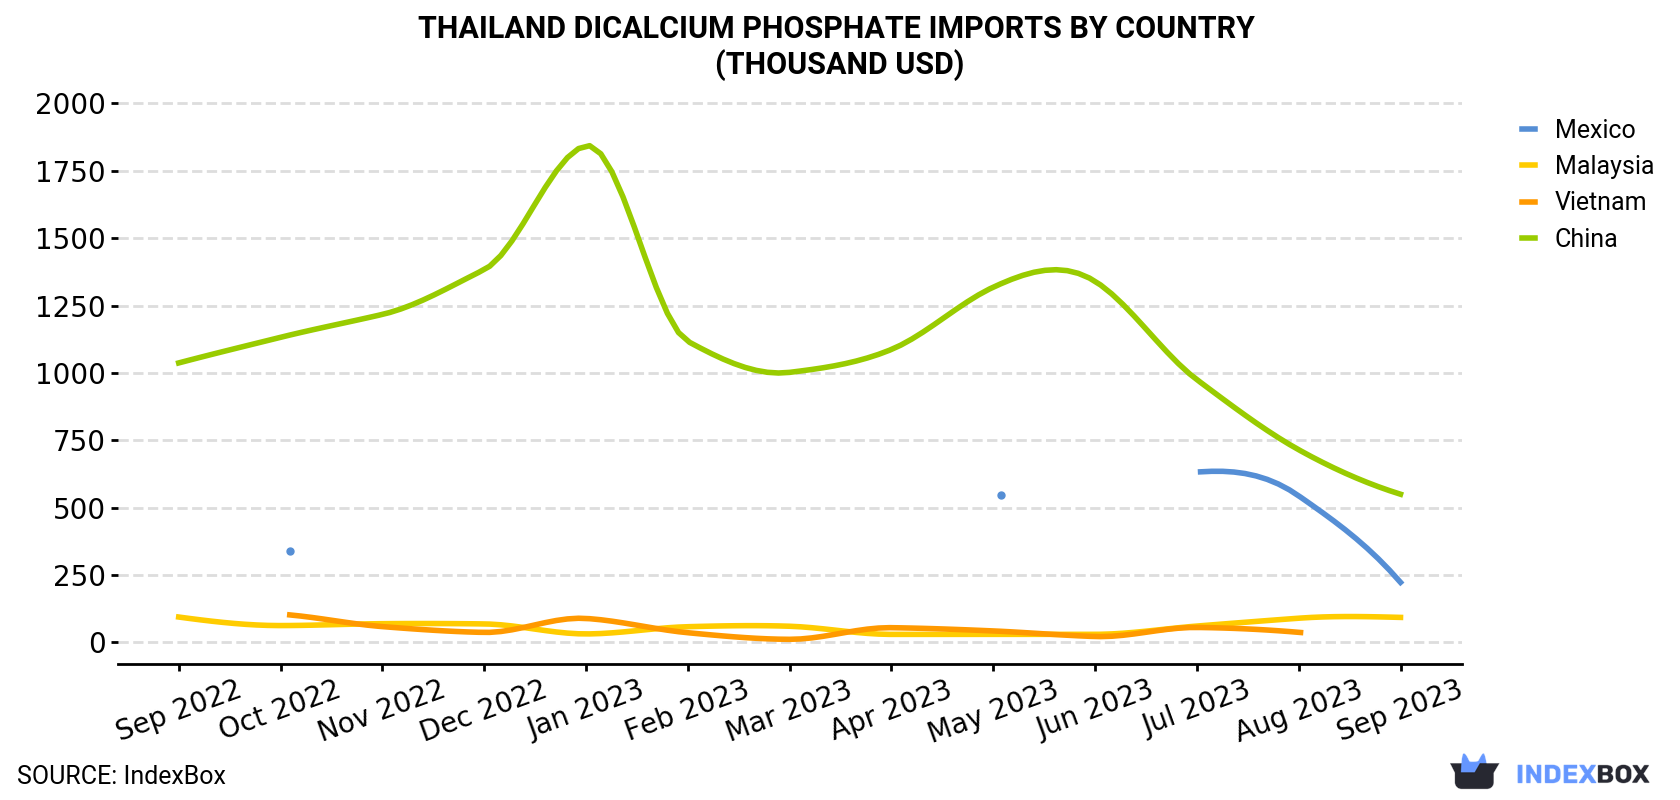 Thailand Dicalcium Phosphate Imports By Country (Thousand USD)